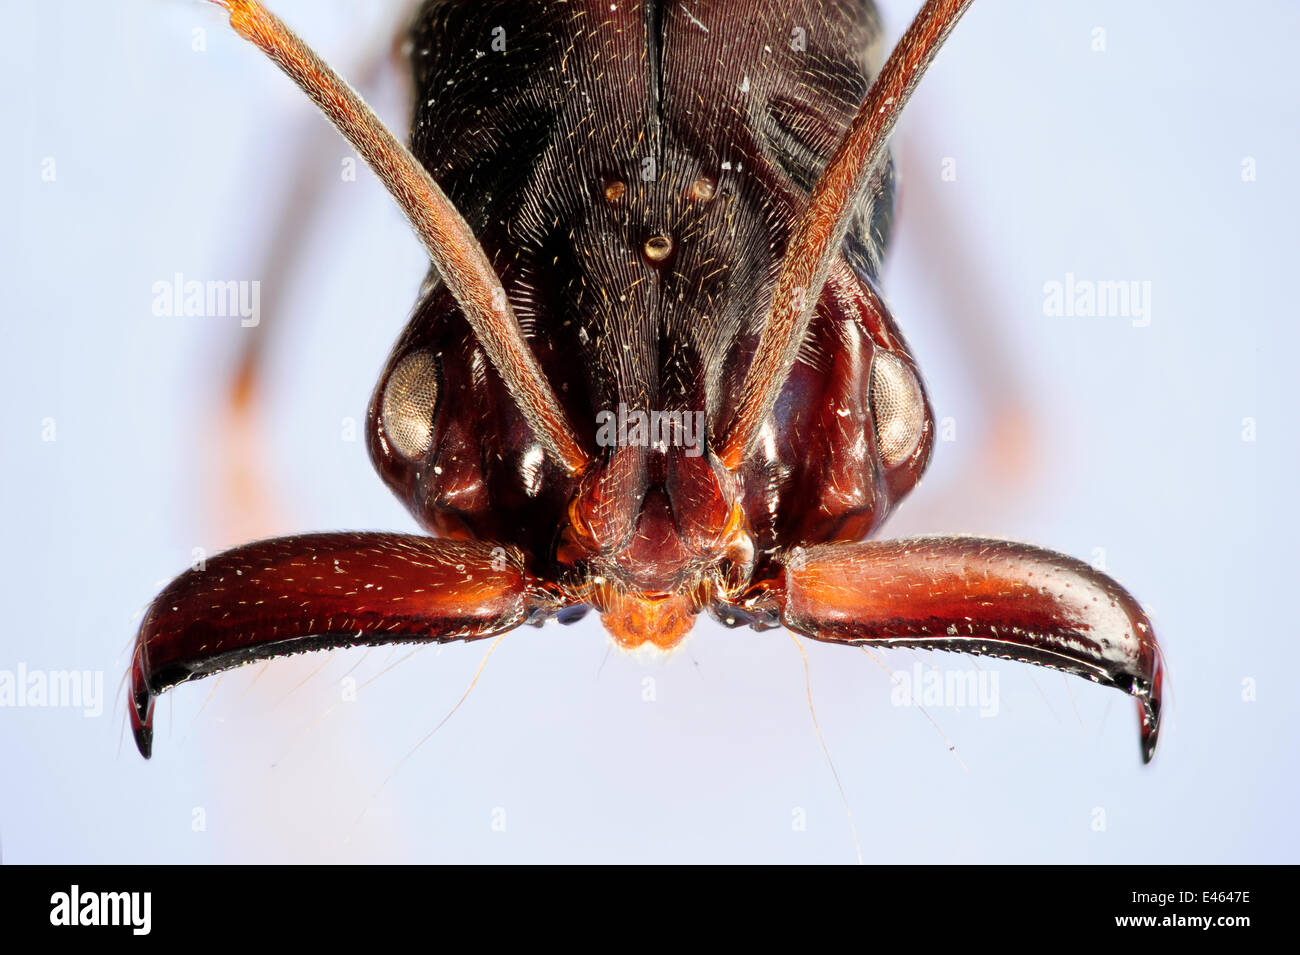 Trap jaw ant (Odontomachus sp.) close-up showing powerful mandibles with sensory hairs. Specimen photographed using digital focus stacking Stock Photo